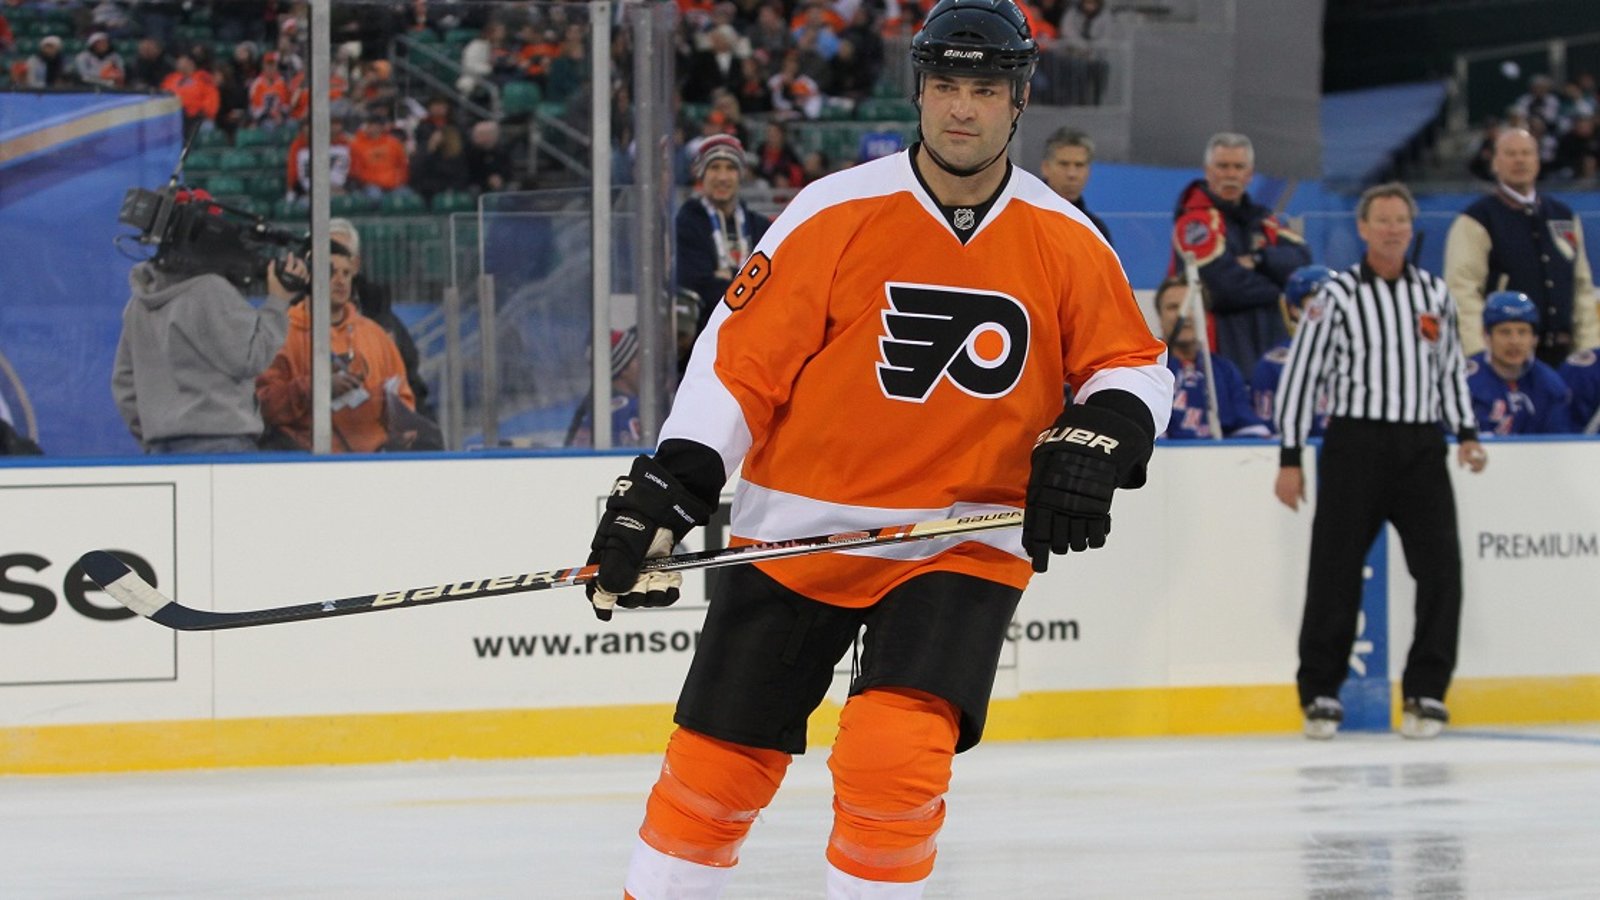 Report: Former Flyers general manager offered Eric Lindros an NHL comeback.